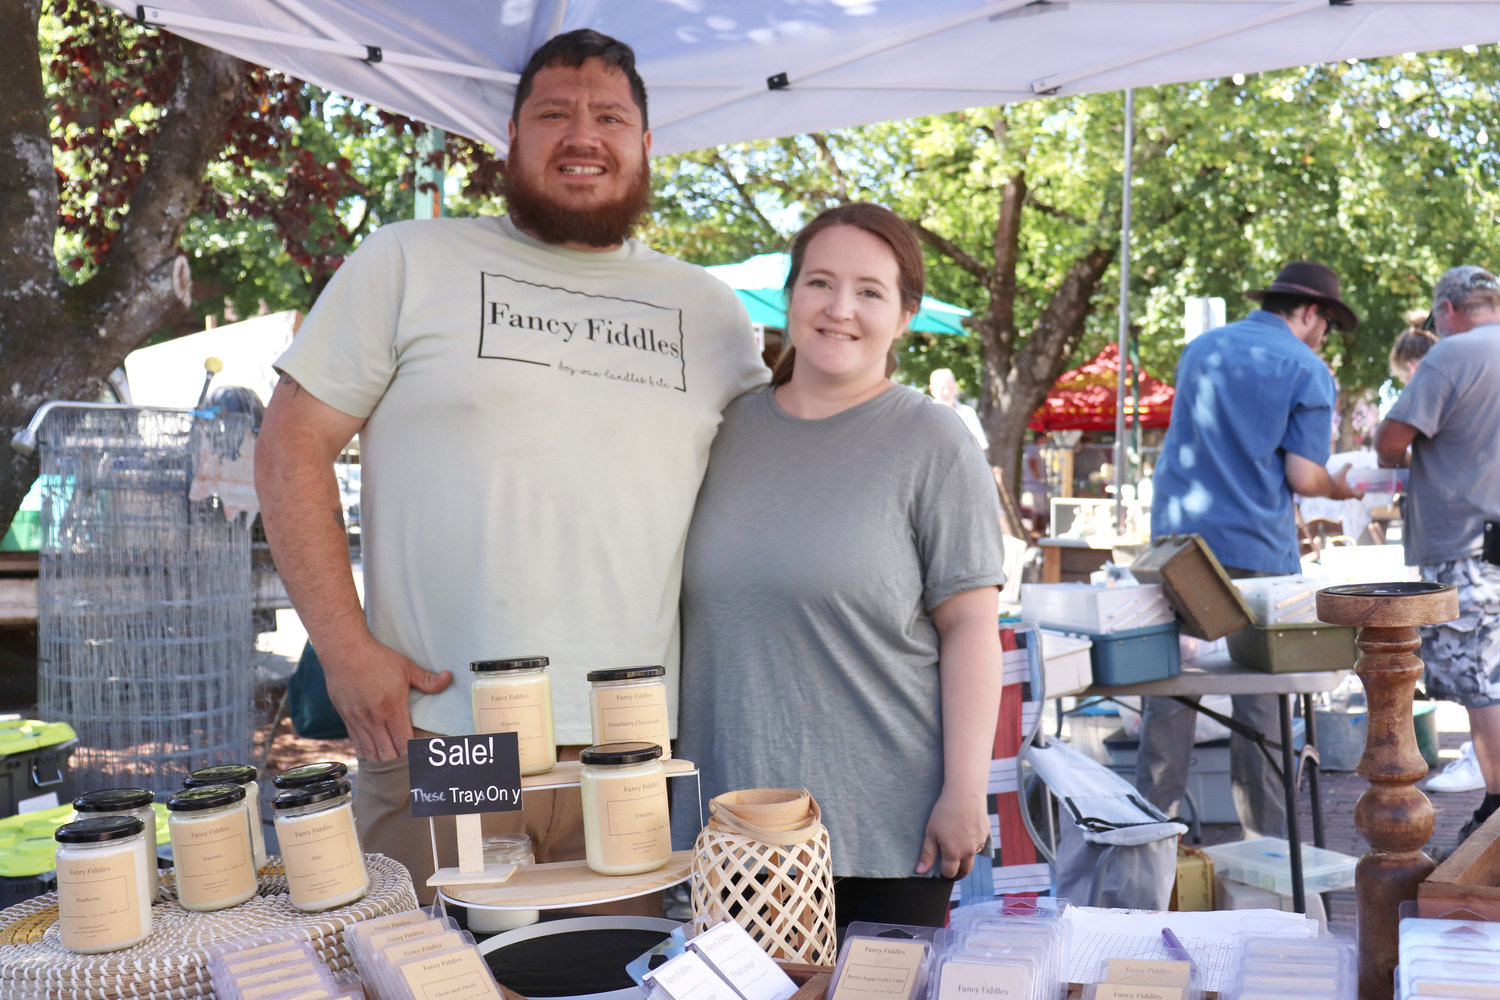 Anthony Favro and Leah Truax of Fancy Fiddles, a handmade home- and body-goods shop based in Chehalis, run a booth at Antique Fest in downtown Centralia on Sunday.